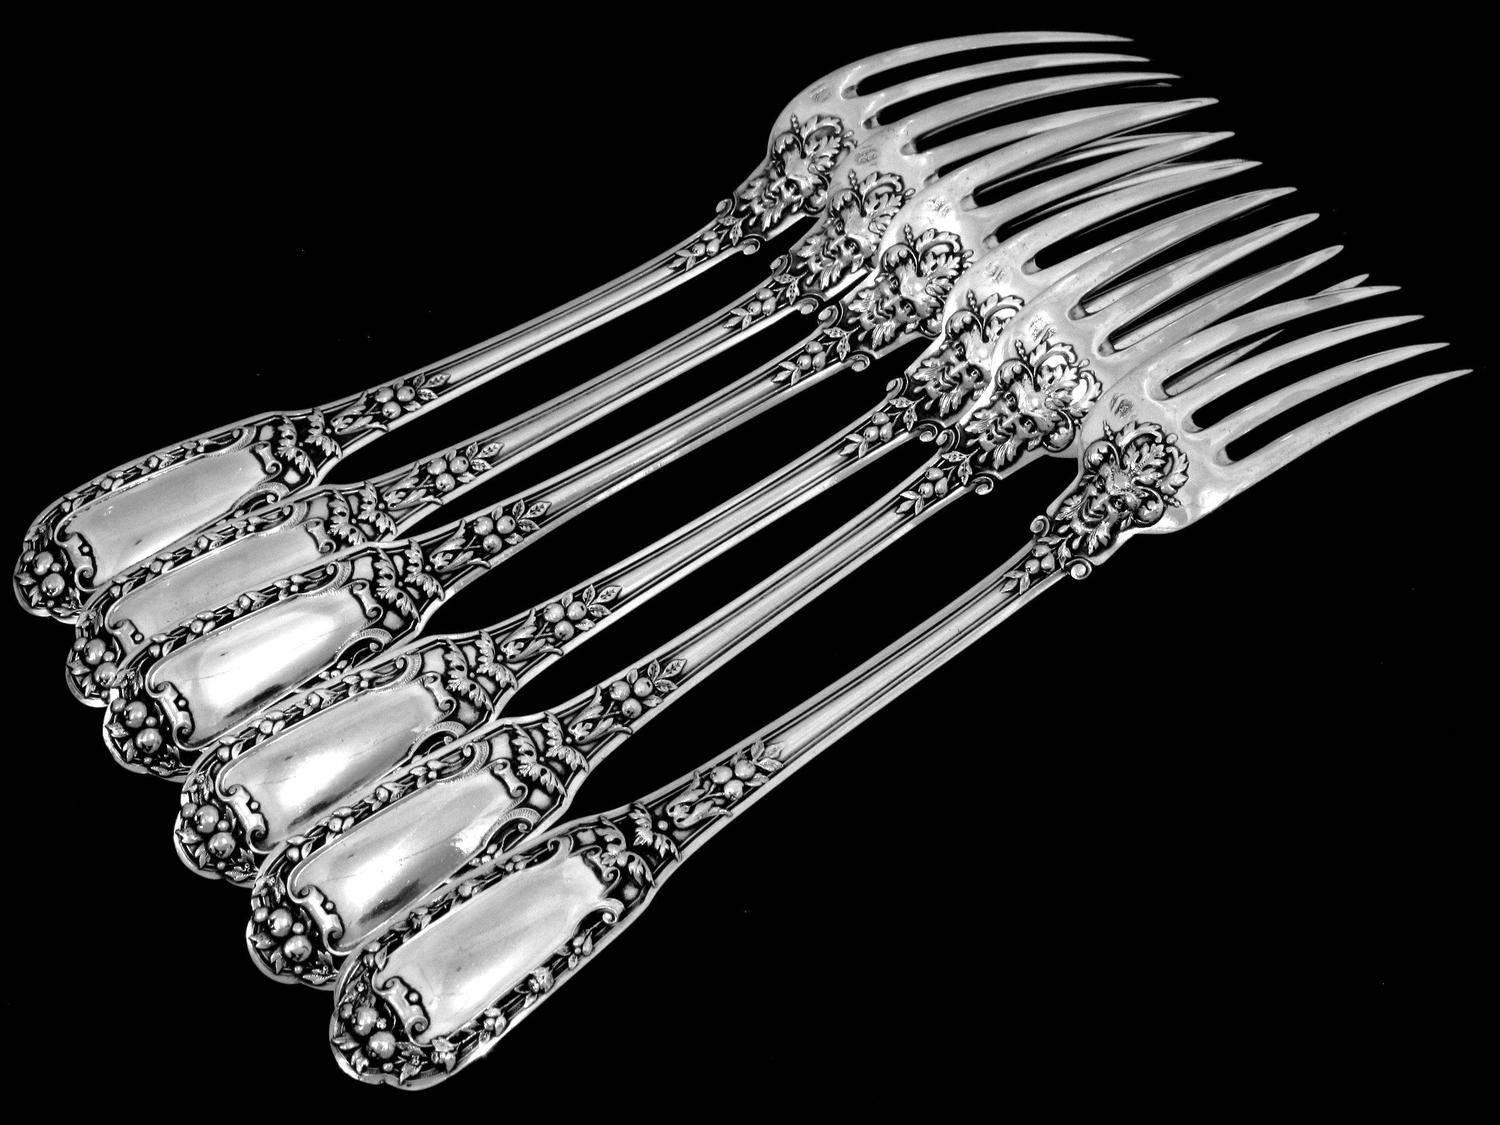 Soufflot Gorgeous French Sterling Silver Dinner Flatware Set 12 Pc Mascarons 5